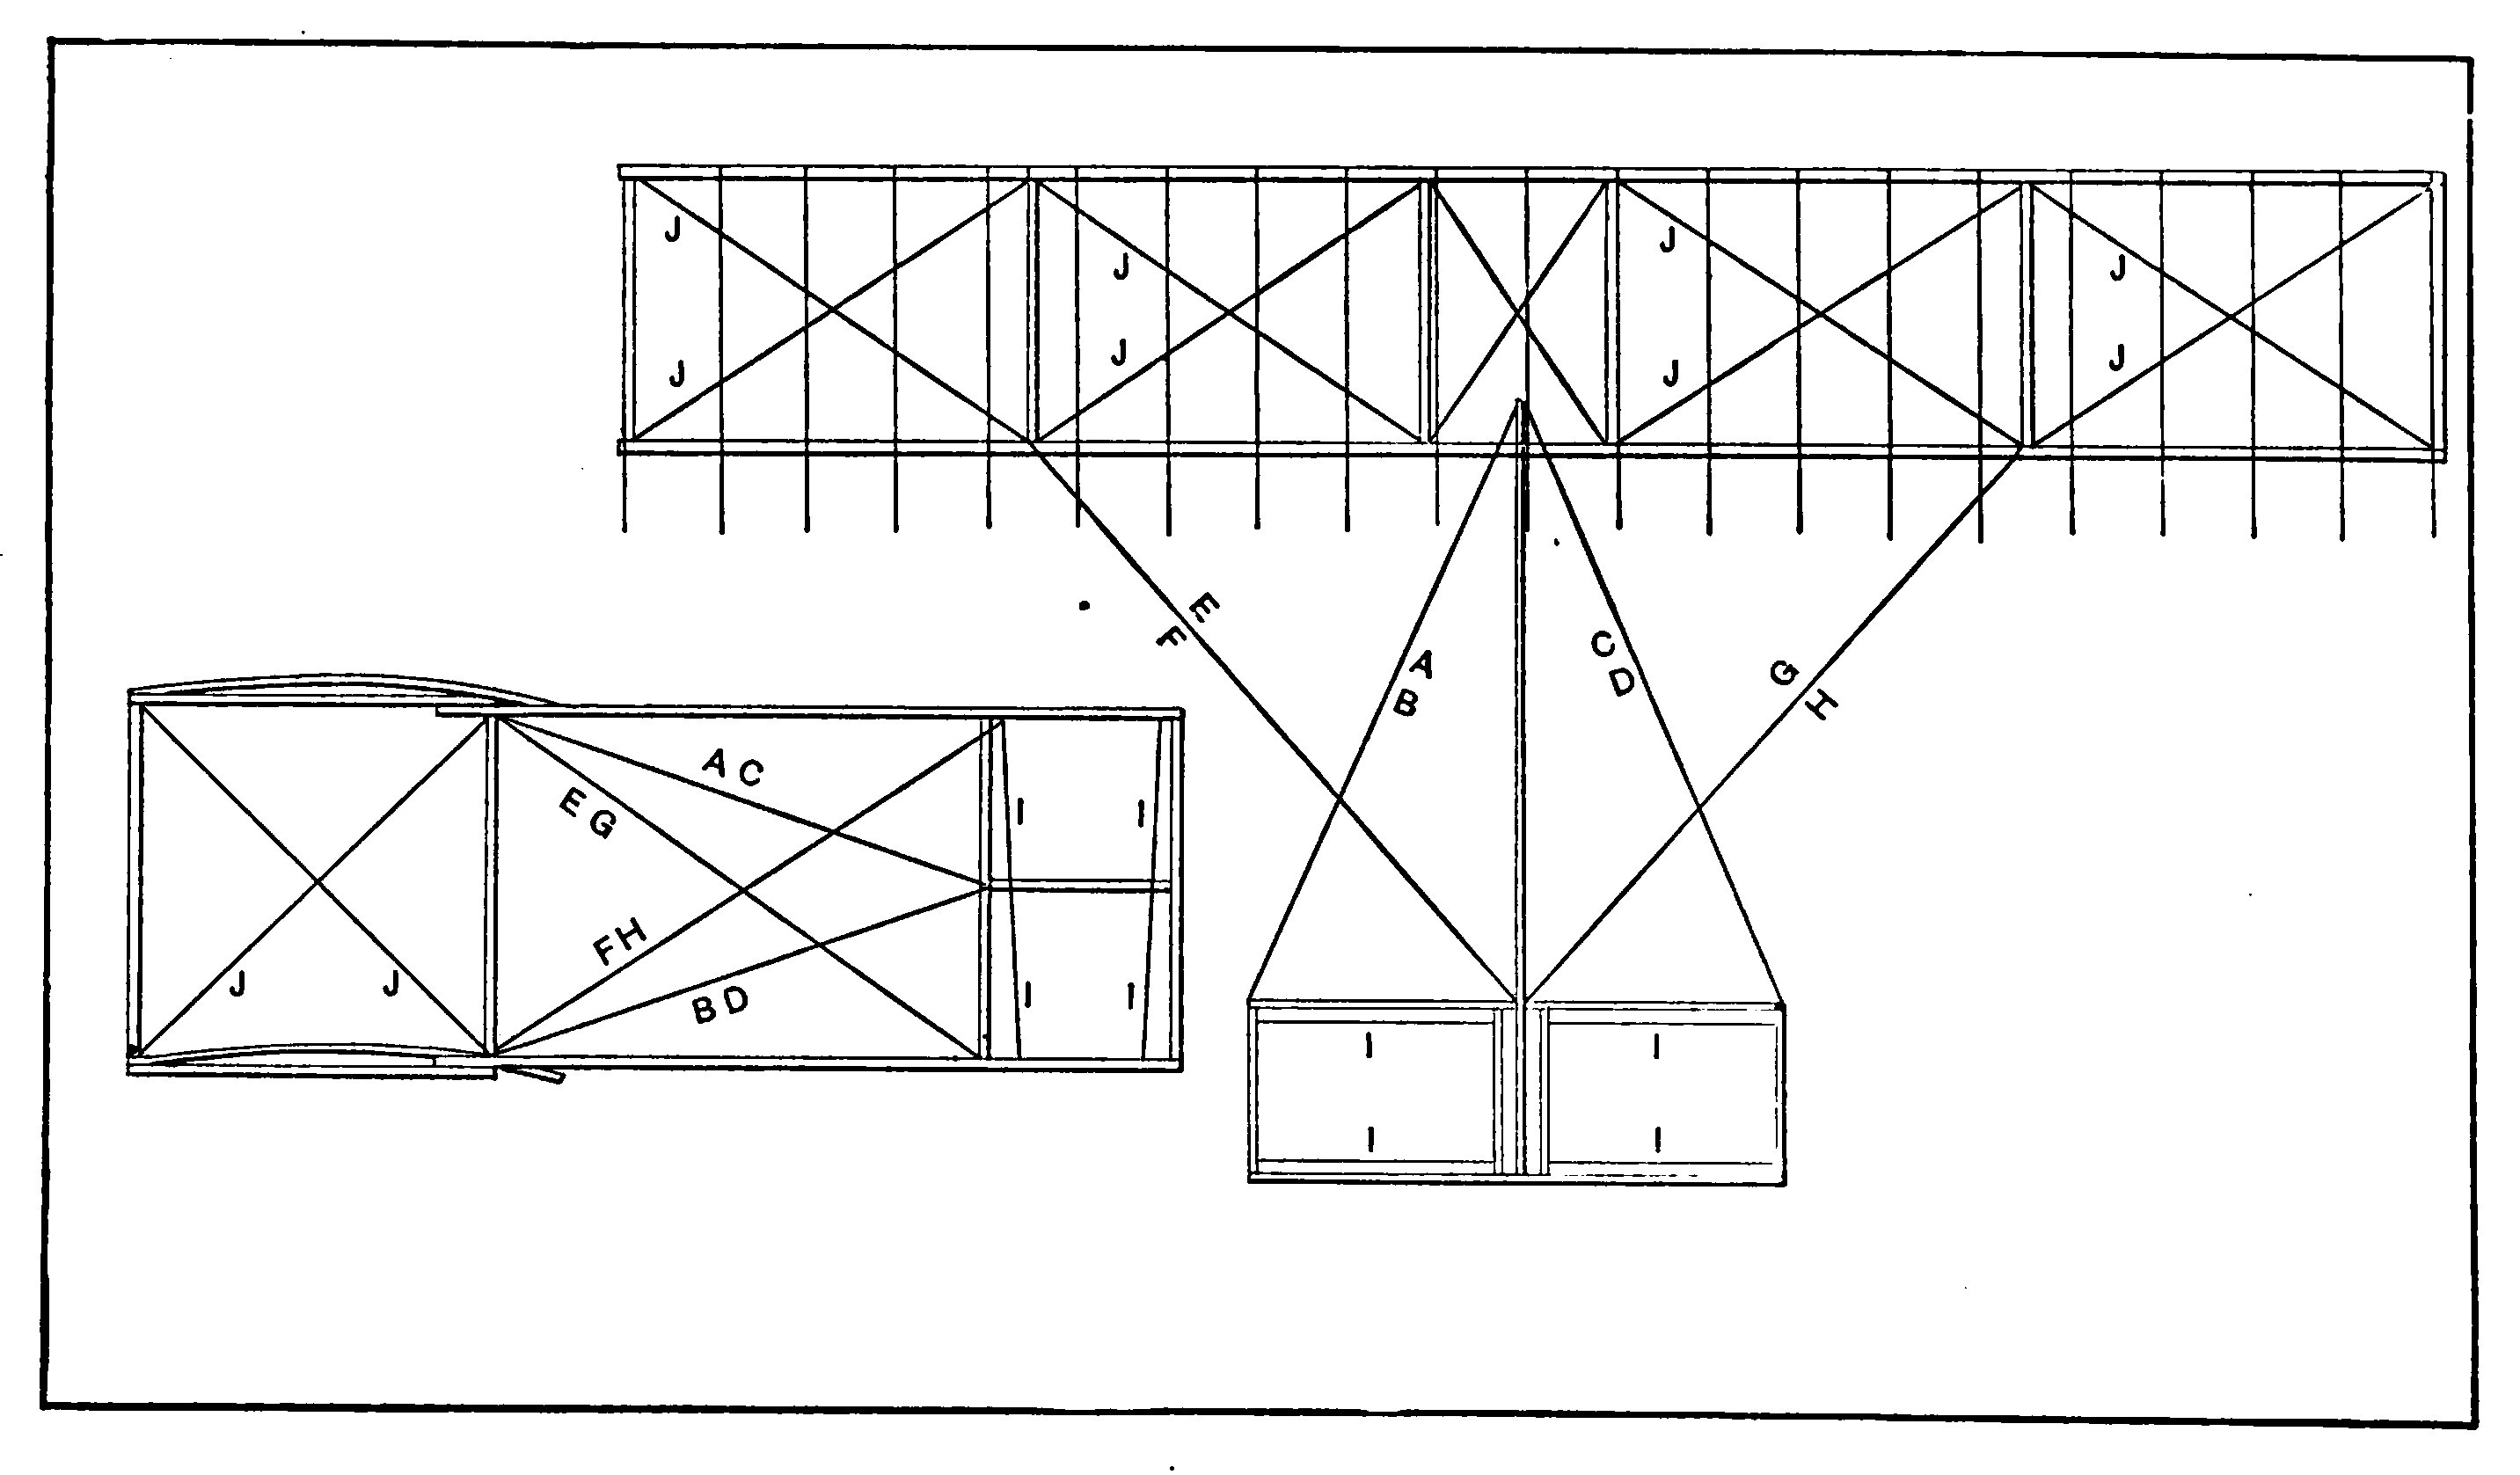 Fig. 23.—Plan and Elevation Views of Piano Wire Bracing.